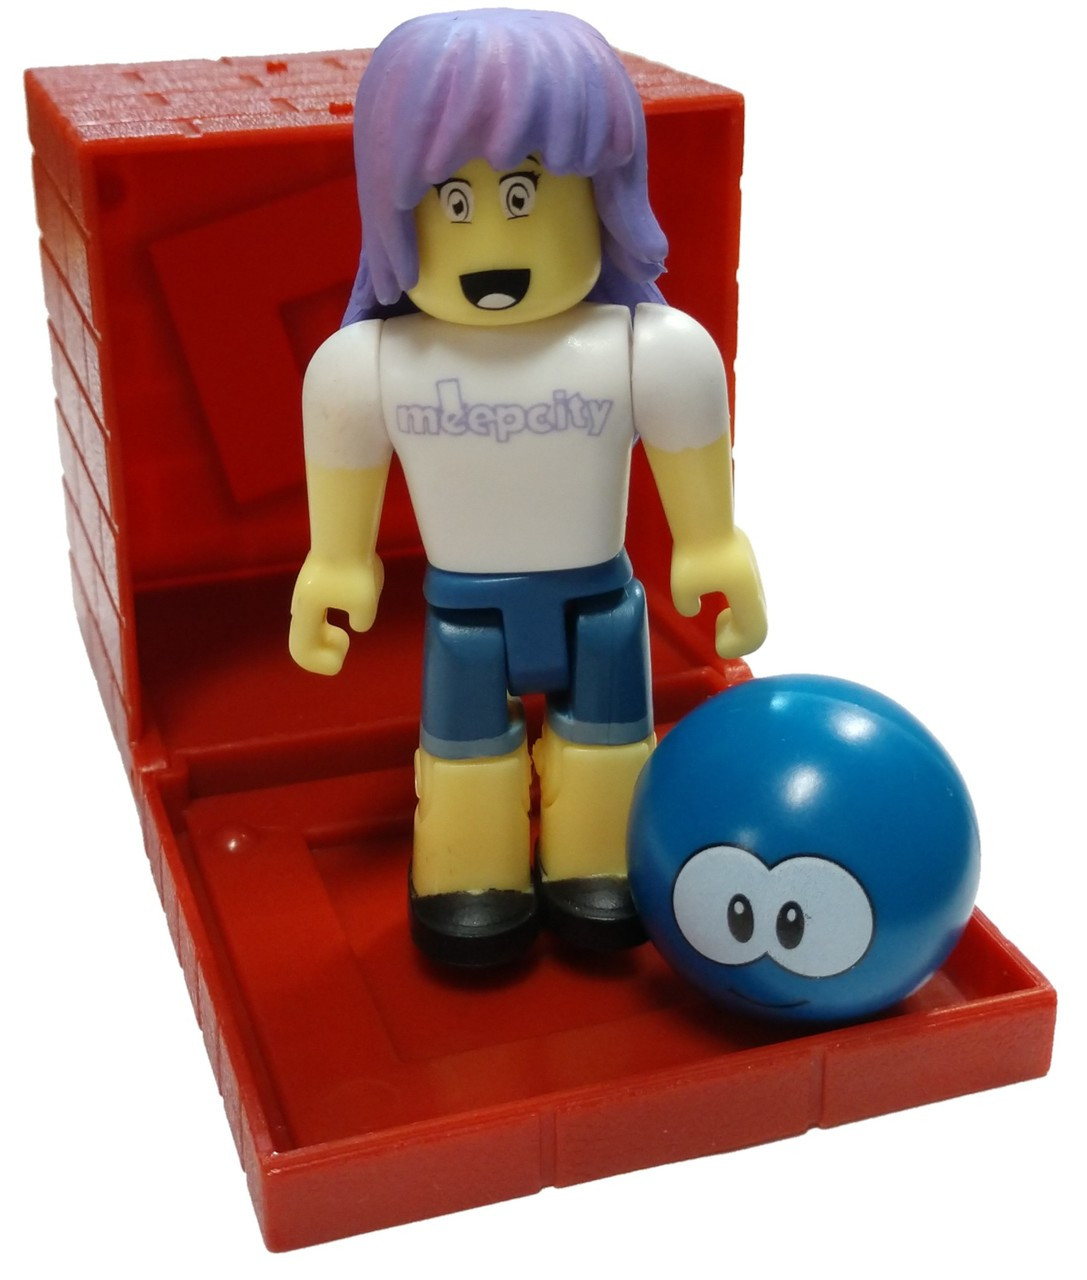 Roblox Red Series 4 Meepcity Pet Seller 3 Mini Figure With Red Cube And Online Code Loose Jazwares Toywiz - roblox code dino red